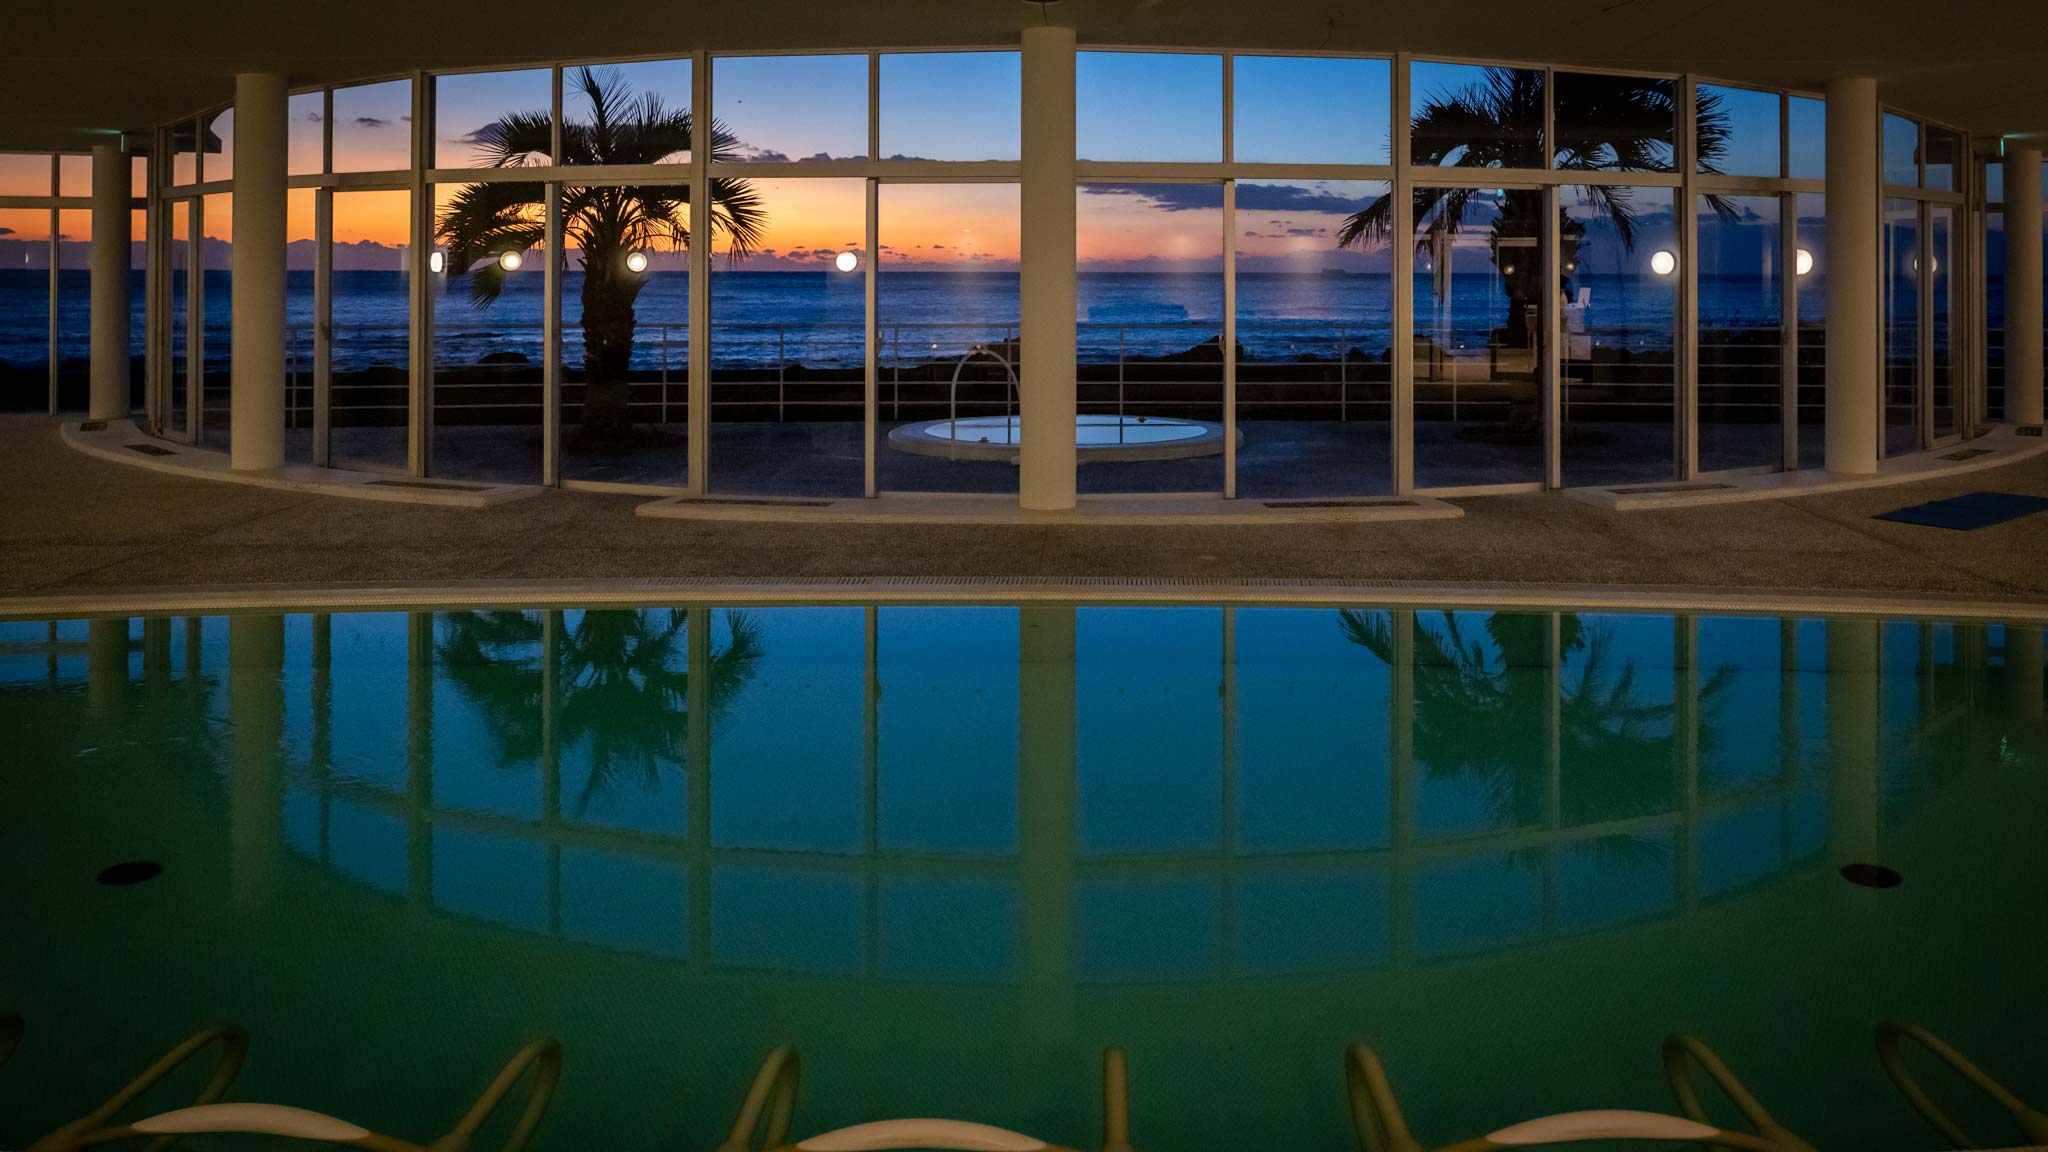 The deep sea therapy pool at sunrise